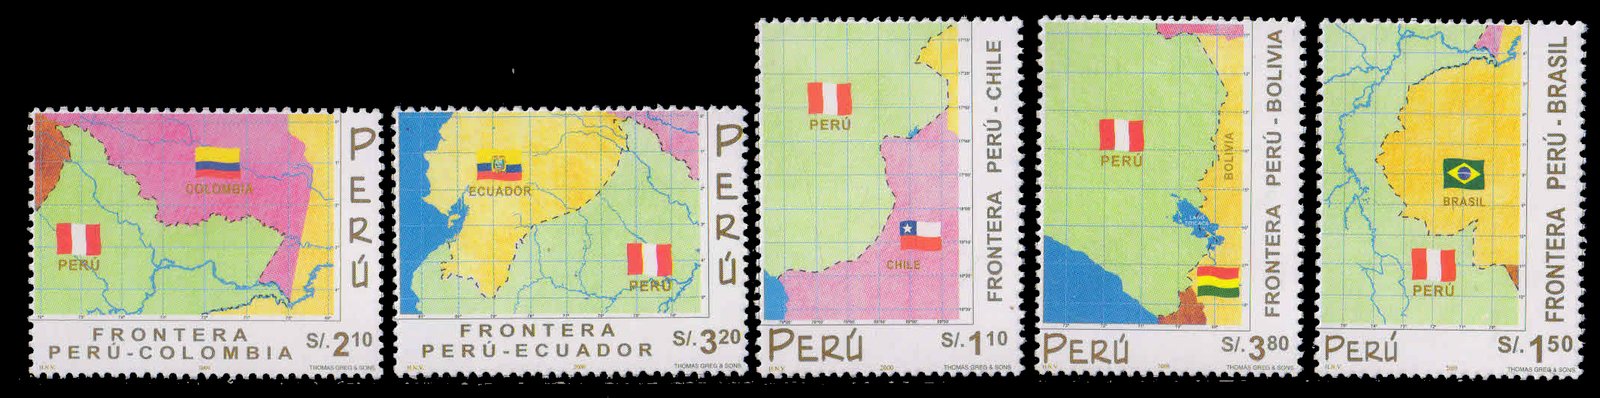 PERU 2000-National Borders of Peru on Map with Flags Chile, Brazil,  Colombia, Ecuador, Bolivia, Set of 5, MNH, S.G. 2080-84-Cat £ 26-